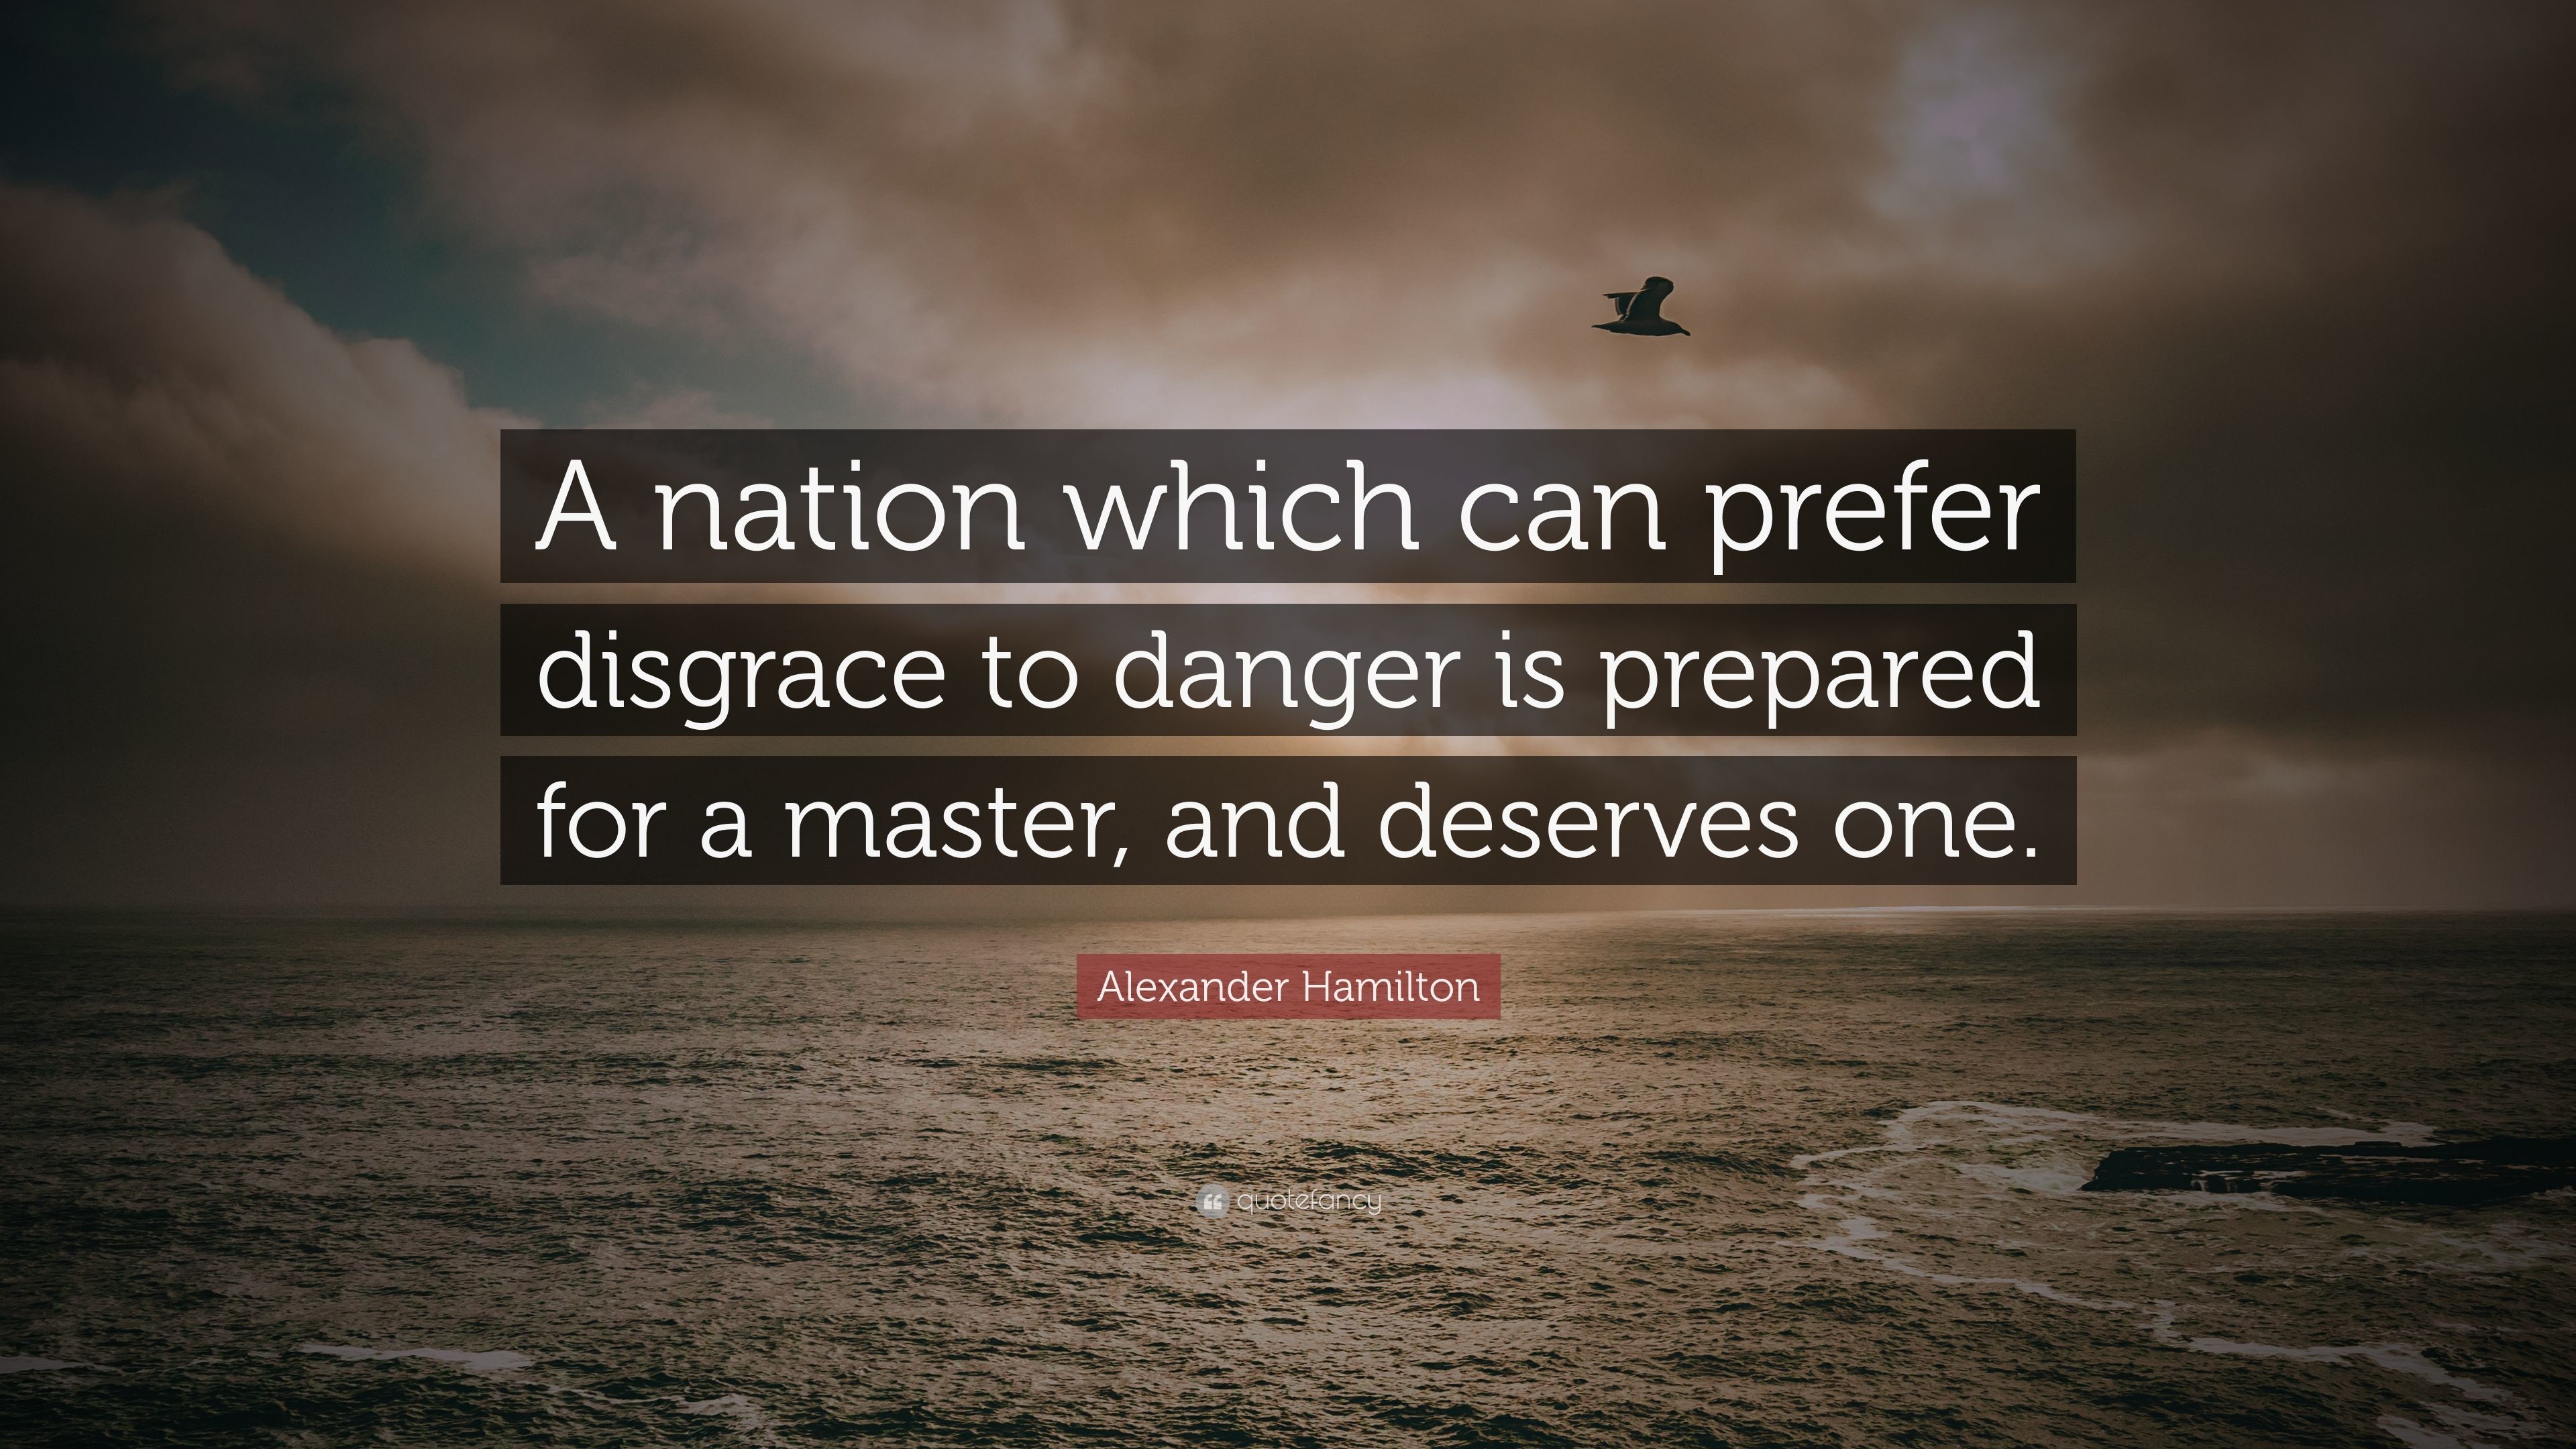 Alexander Hamilton Quote: "A nation which can prefer disgrace to dange...